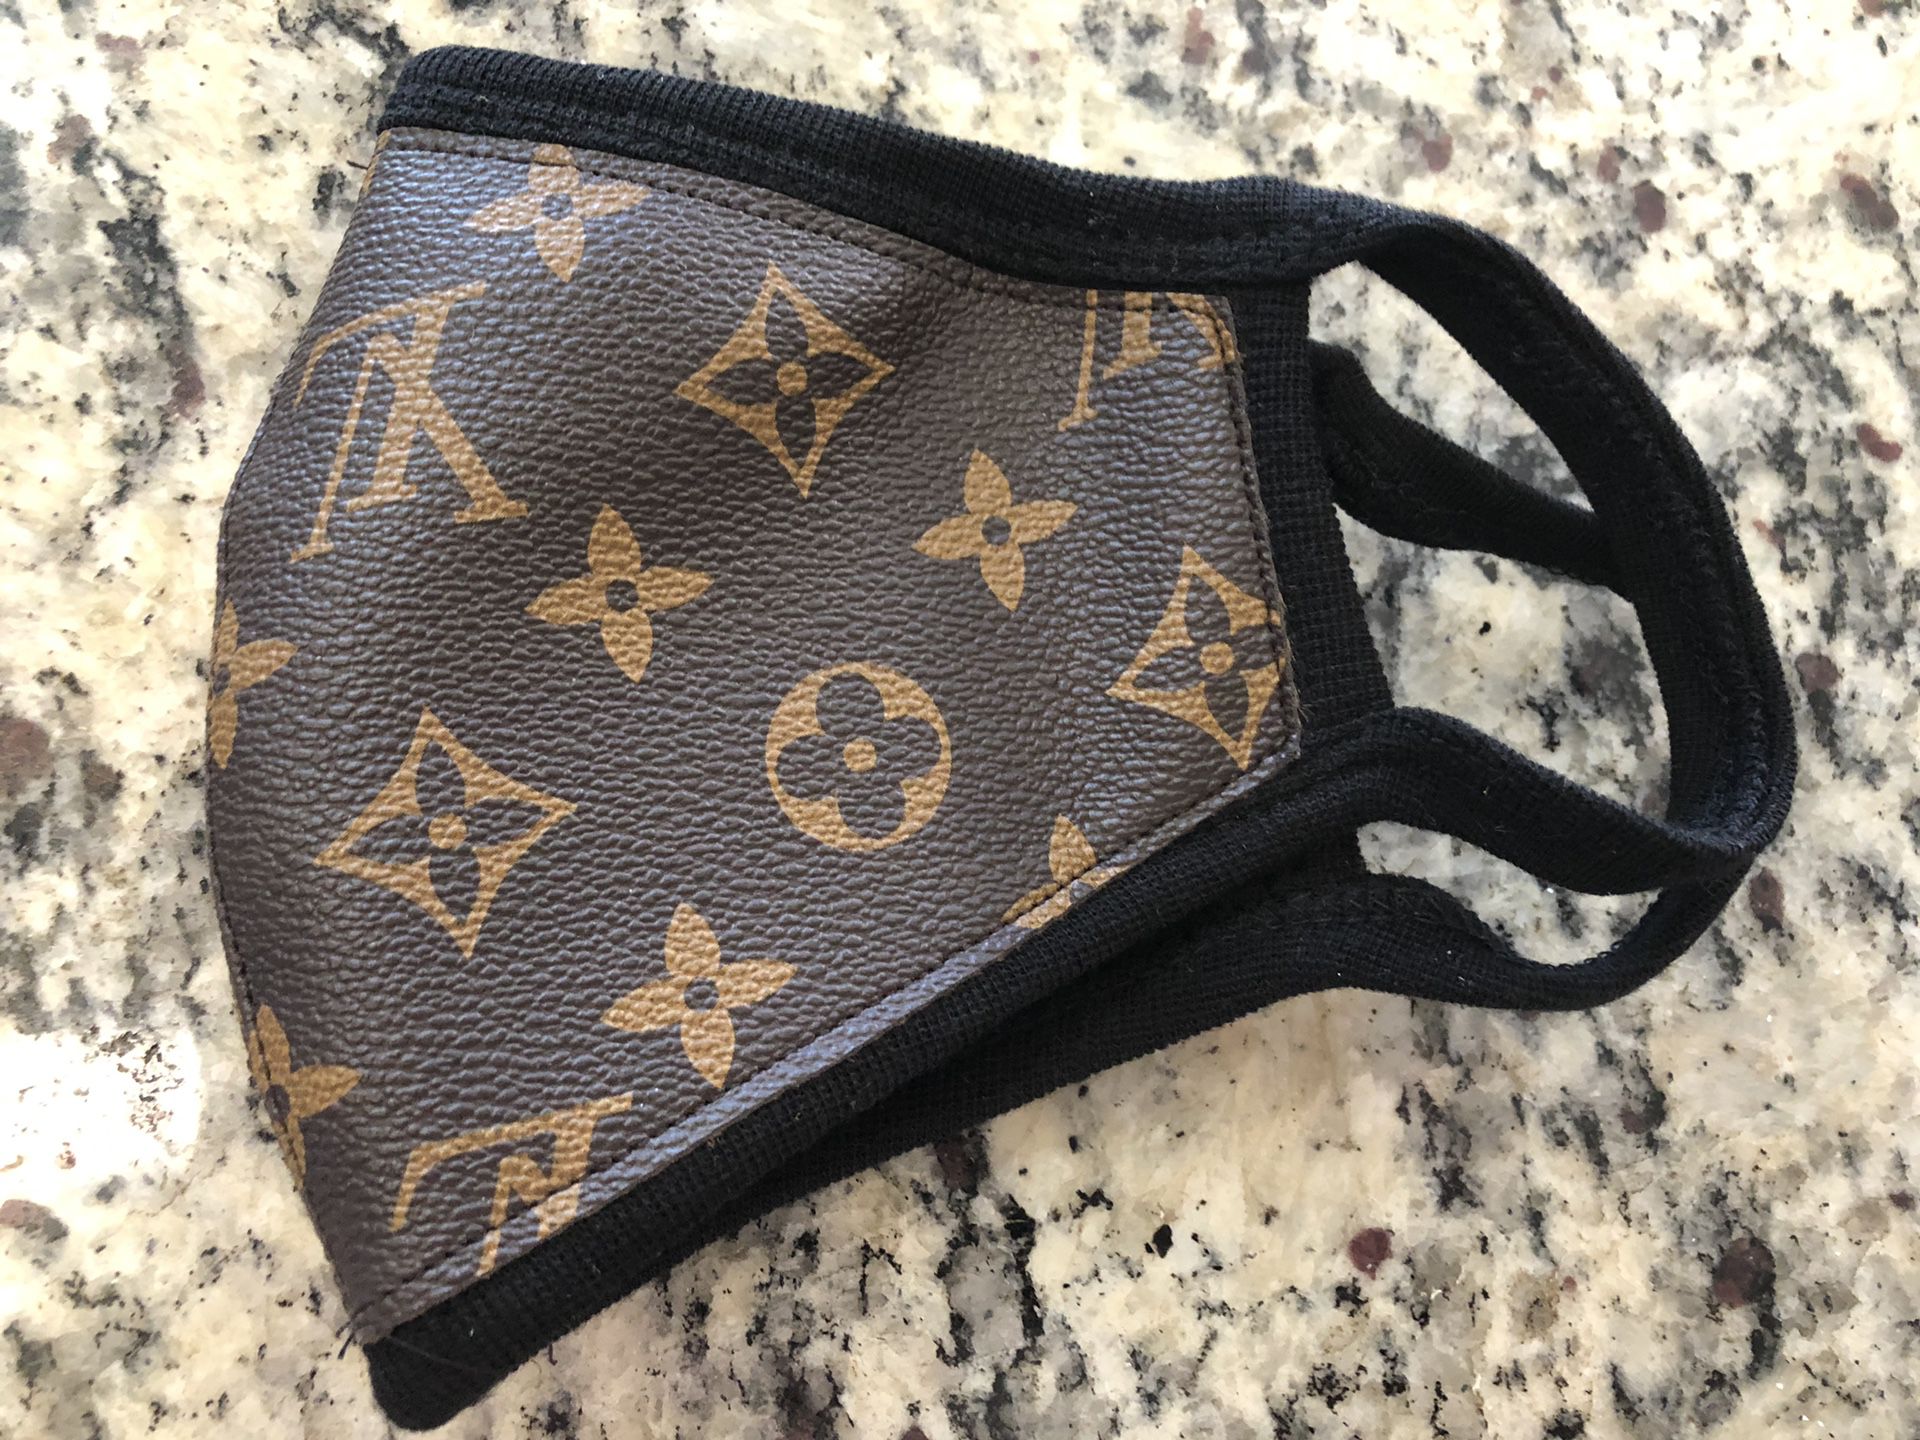 Are Louis Vuitton Face Mask Real